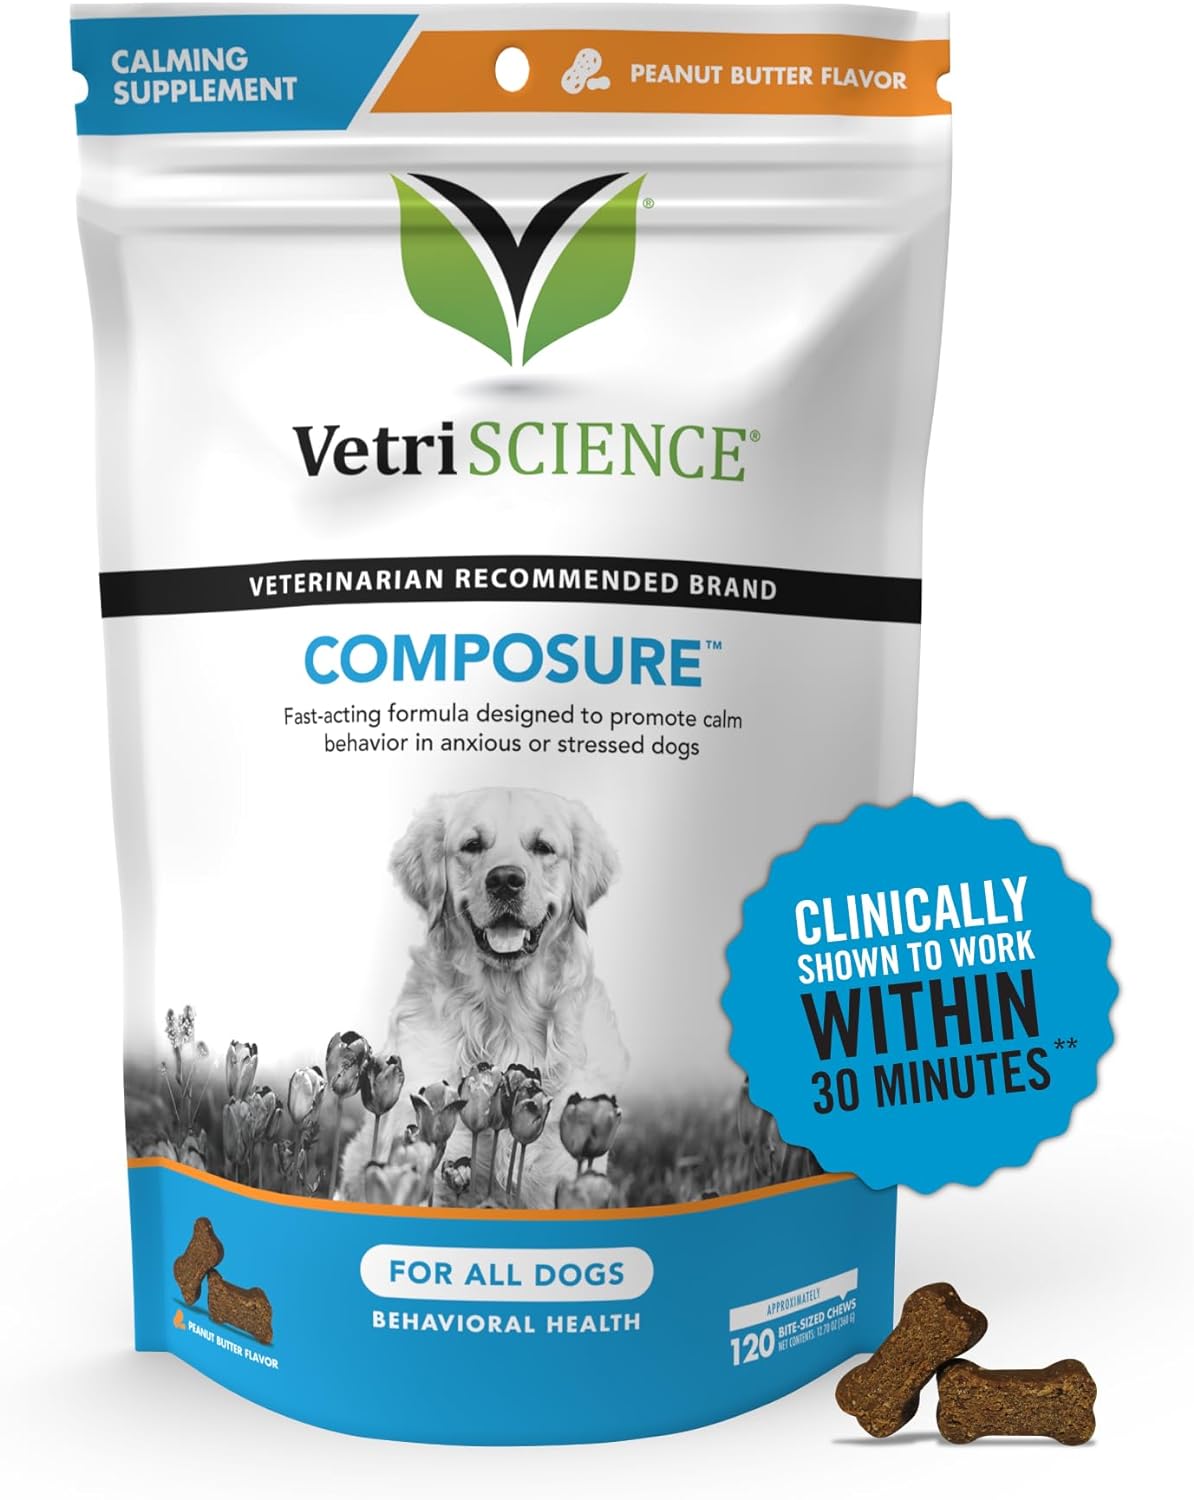 VetriScience Composure Calming Chews for Dogs - Clinically Proven Dog Anxiety Relief Supplement with Colostrum, L-Theanine & Vitamin B1 for Stress, Storms, Separation & More - 120 Peanut Butter Chews